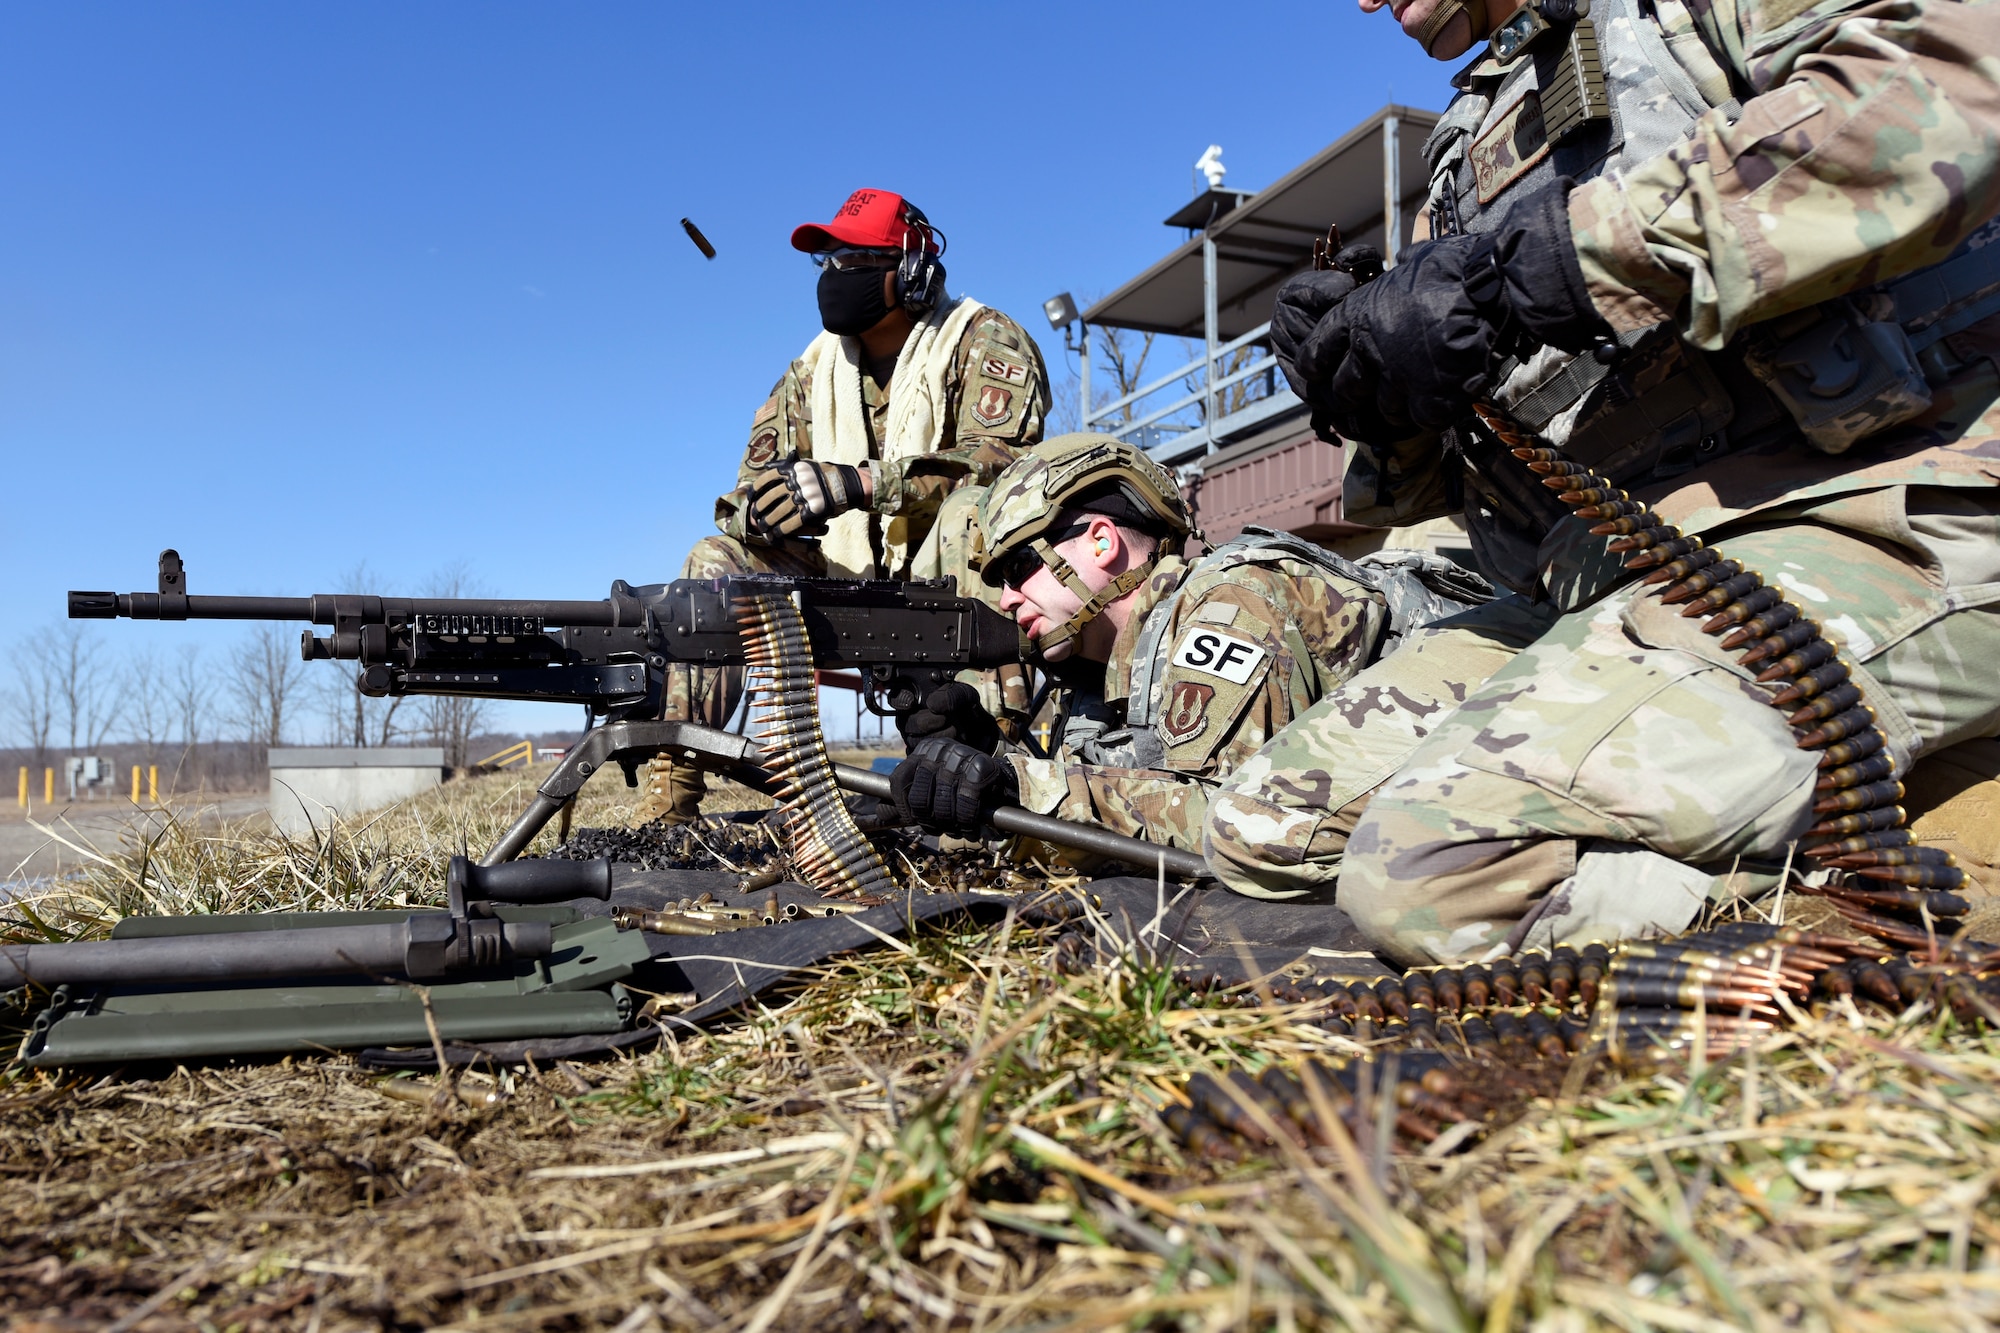 Air Force Technical Sgt. Richard Thomas, the 88th Security Forces Squadron noncommissioned officer in charge of Combat Arms, fires an M240B machine gun at Camp Atterbury in Edinburgh, Indiana, on Feb. 25, 2021. Members of the 88th SFS, travel to Camp Atterbury multiple times each year for readiness and qualification training with deployers on machine guns and grenade launchers. (U.S. Air Force photo by Ty Greenlees)